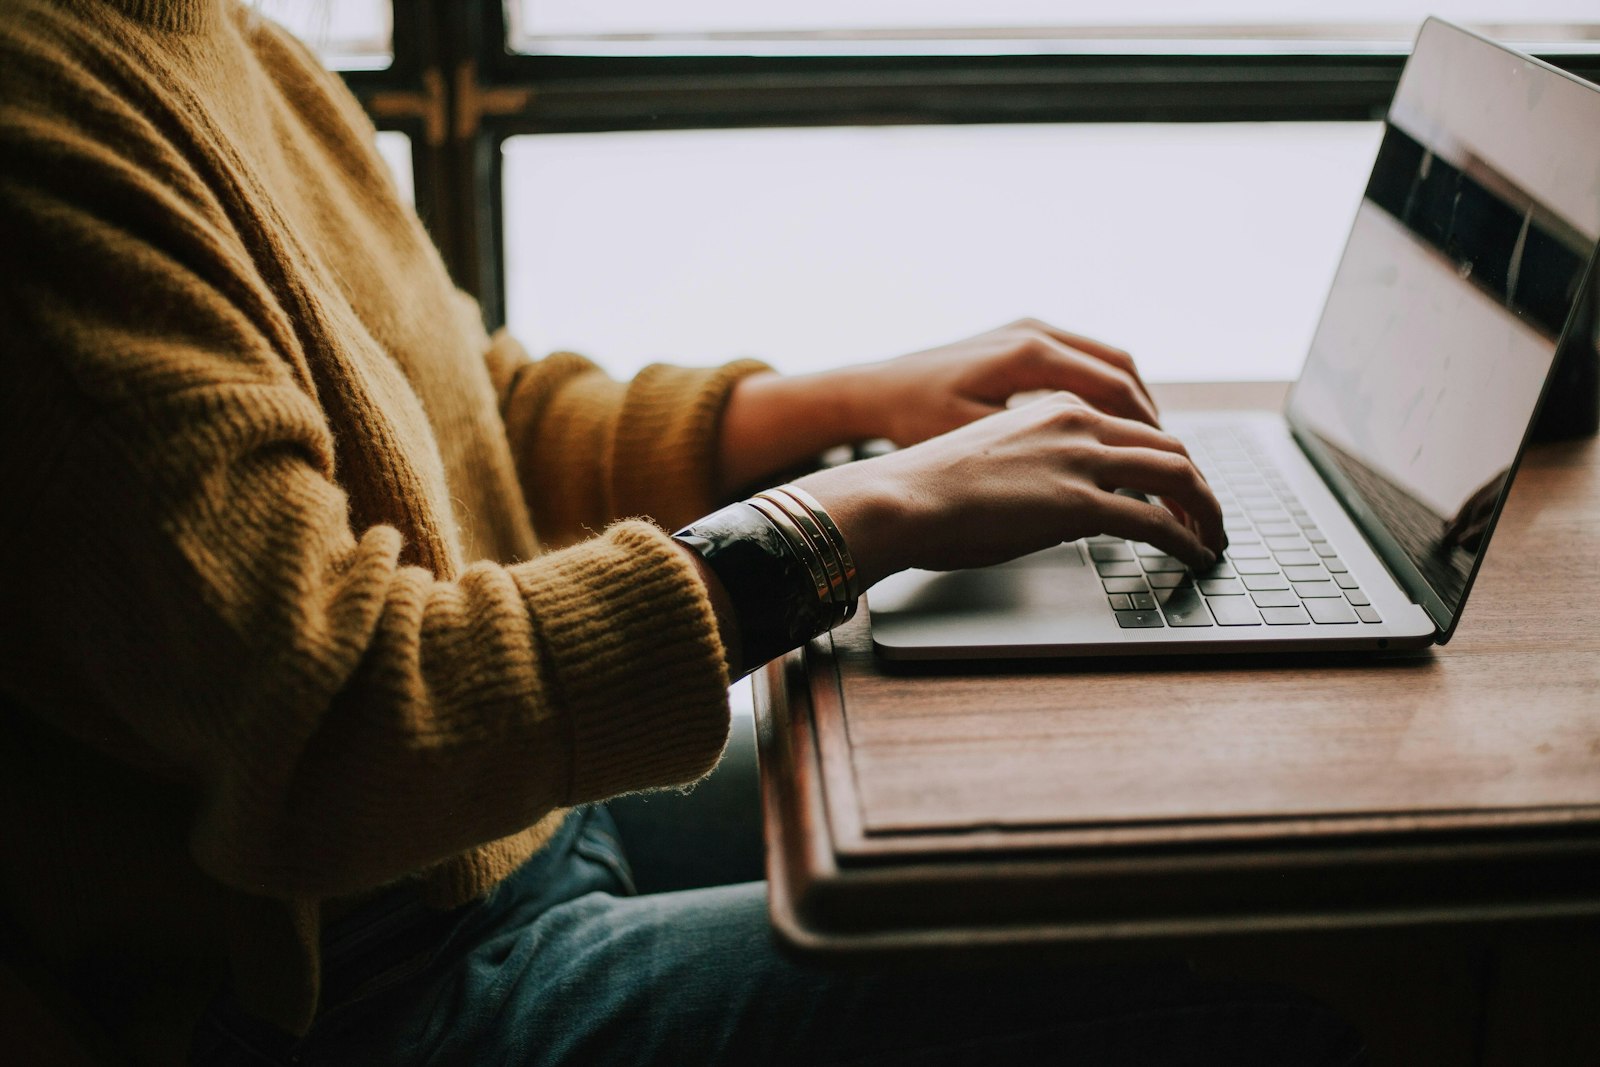 Close up of a person wearing a sweater and bracelets typing on a laptop